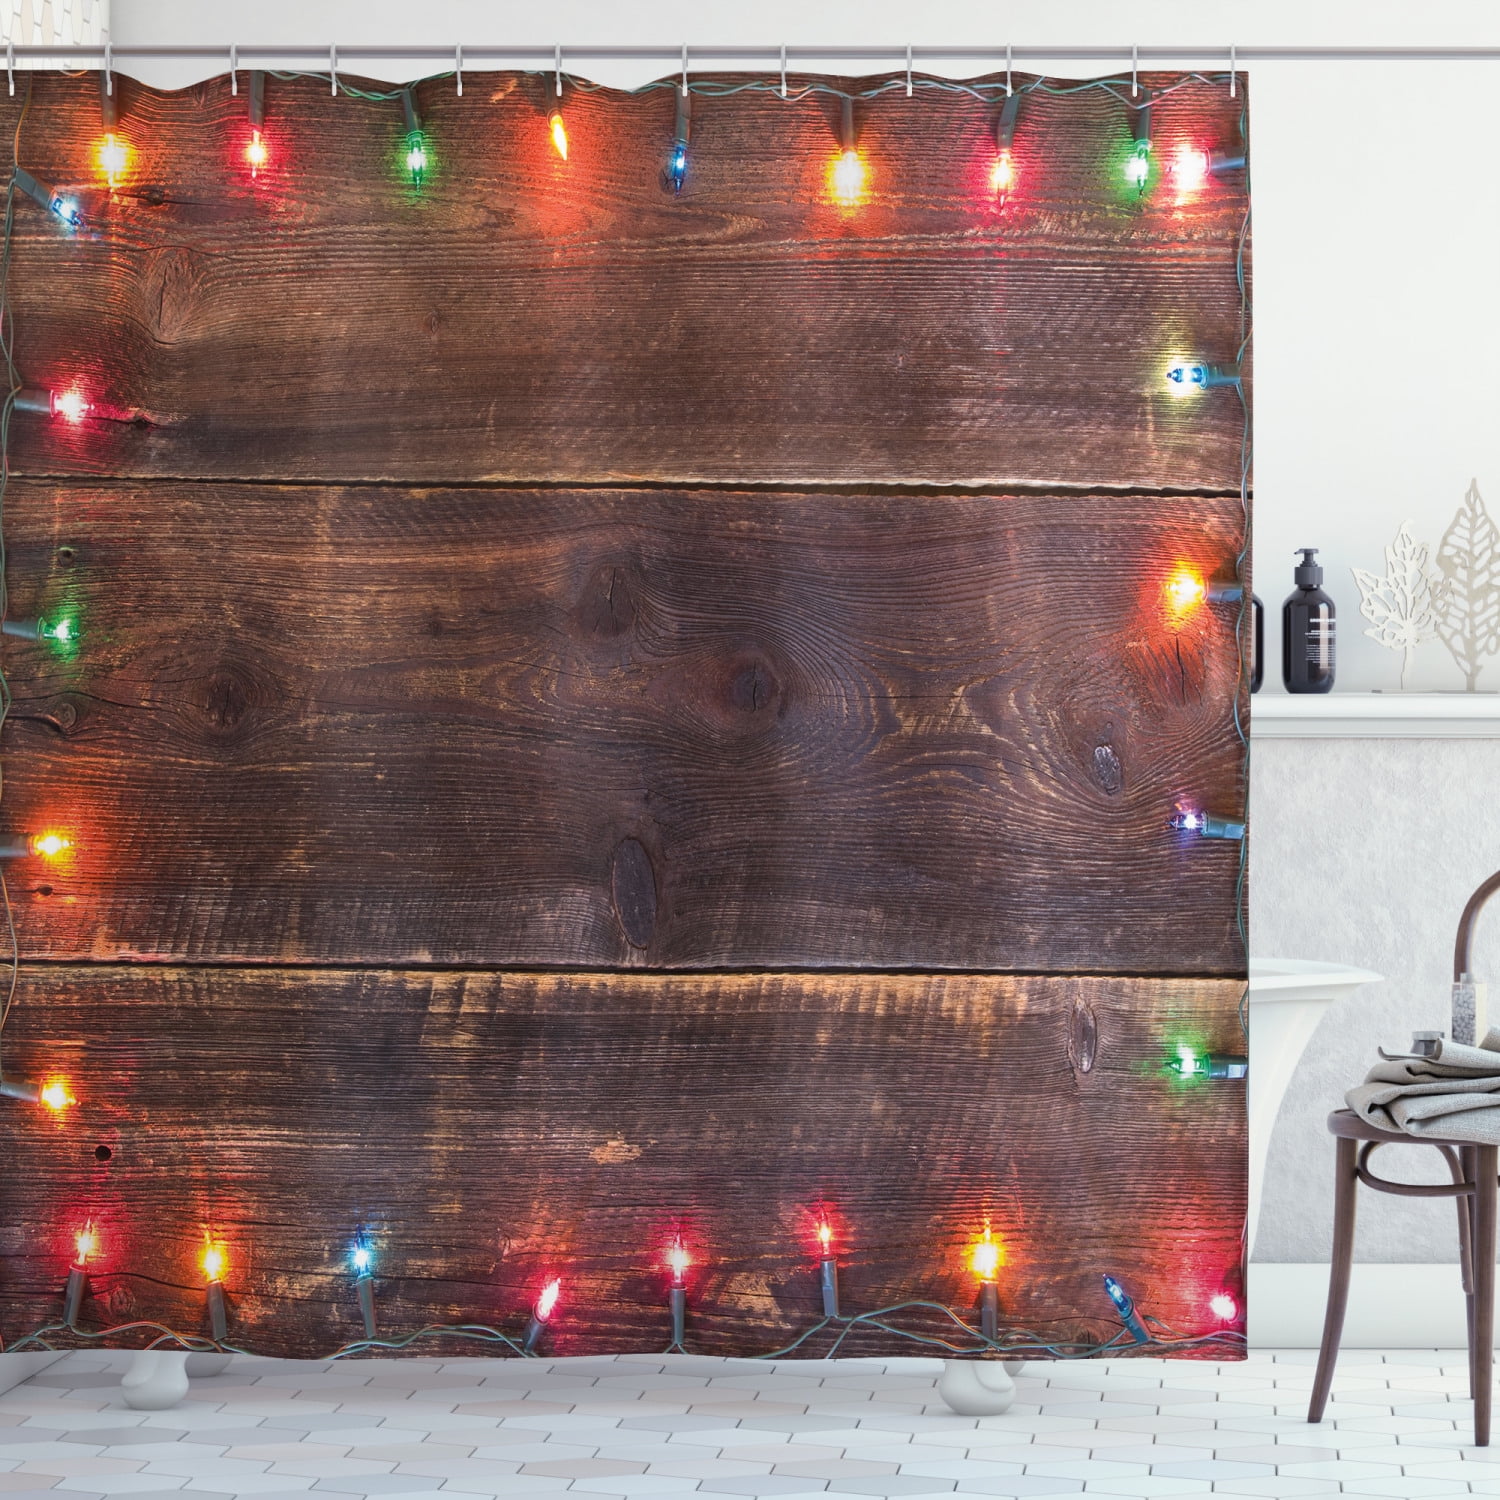 Details about   Merry Christmas New Year Rustic Wooden Board Shower Curtain Set Bathroom Decor 